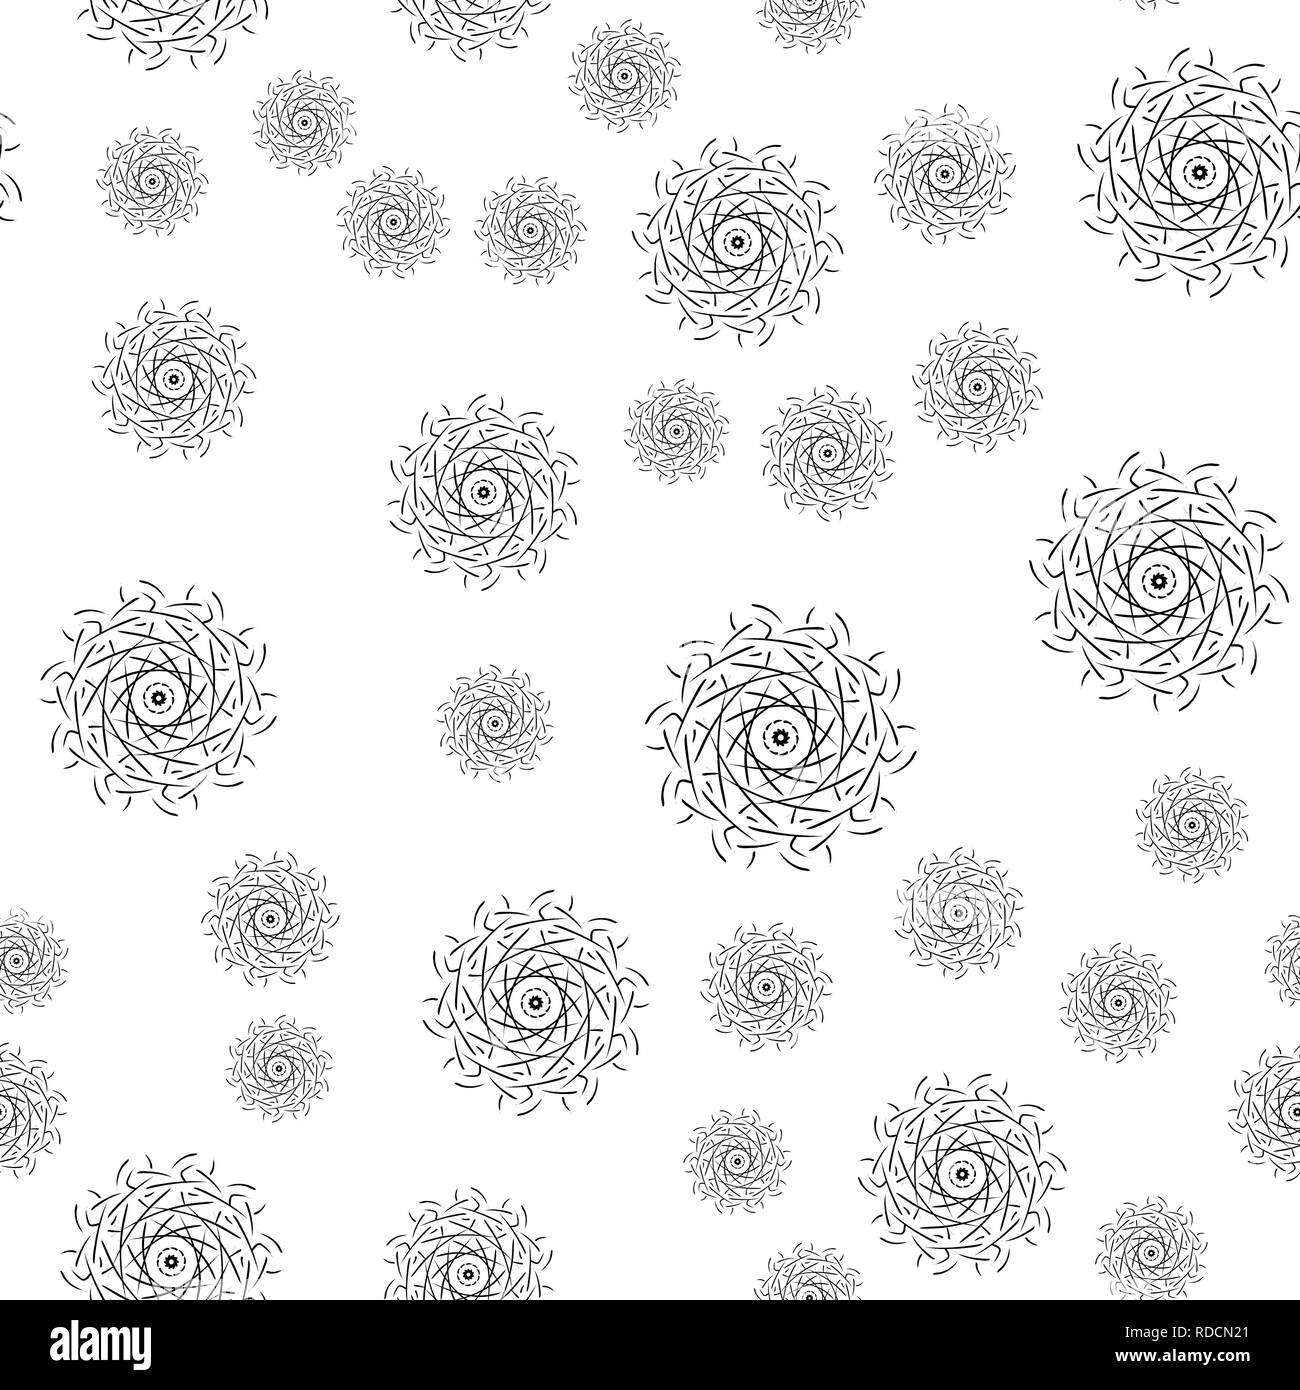 Mandala seamless pattern on white background. Coloring pages for adults. Coloring book. Ornamental hand drawn doodle nature ornamental mandala vector. Stock Vector